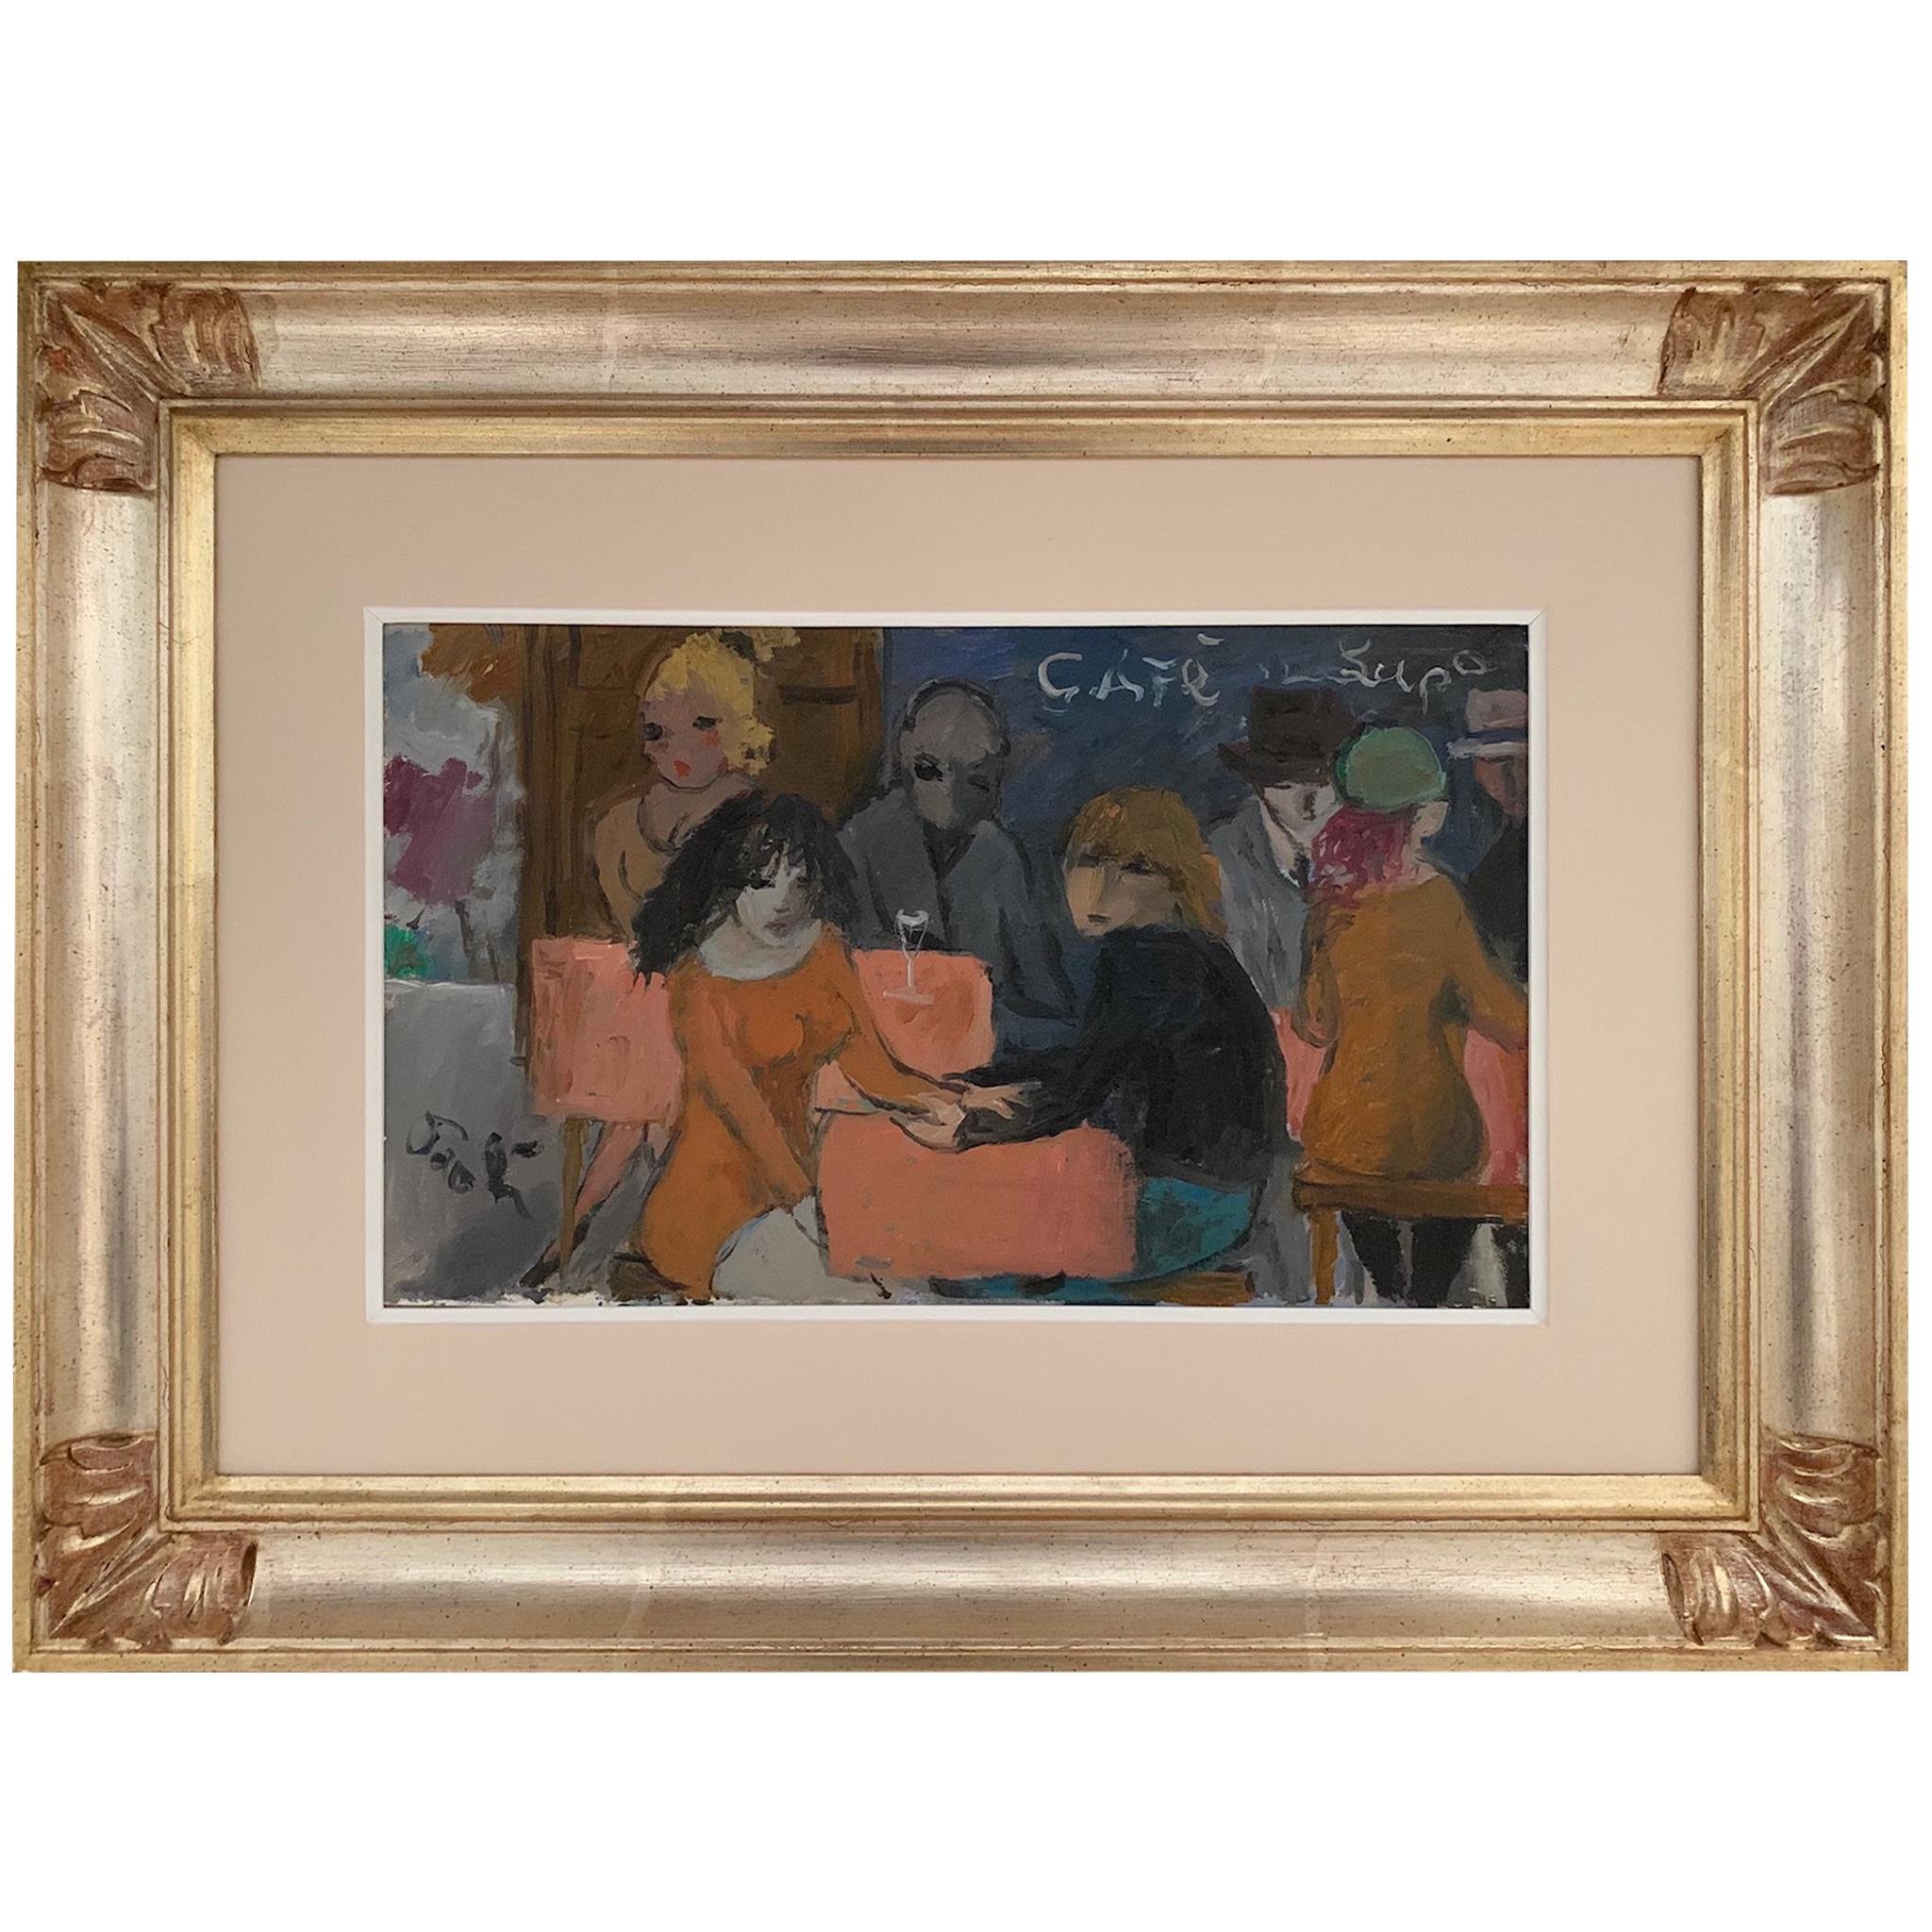 Certificate of authenticity and artist catalogue are included.

Bruno Paoli (1915-2005)
Teaching the masters helped create this contemporary master.
Bruno was a professor of art in Florence in the 1950s before gaining recognition in the 60s, leading